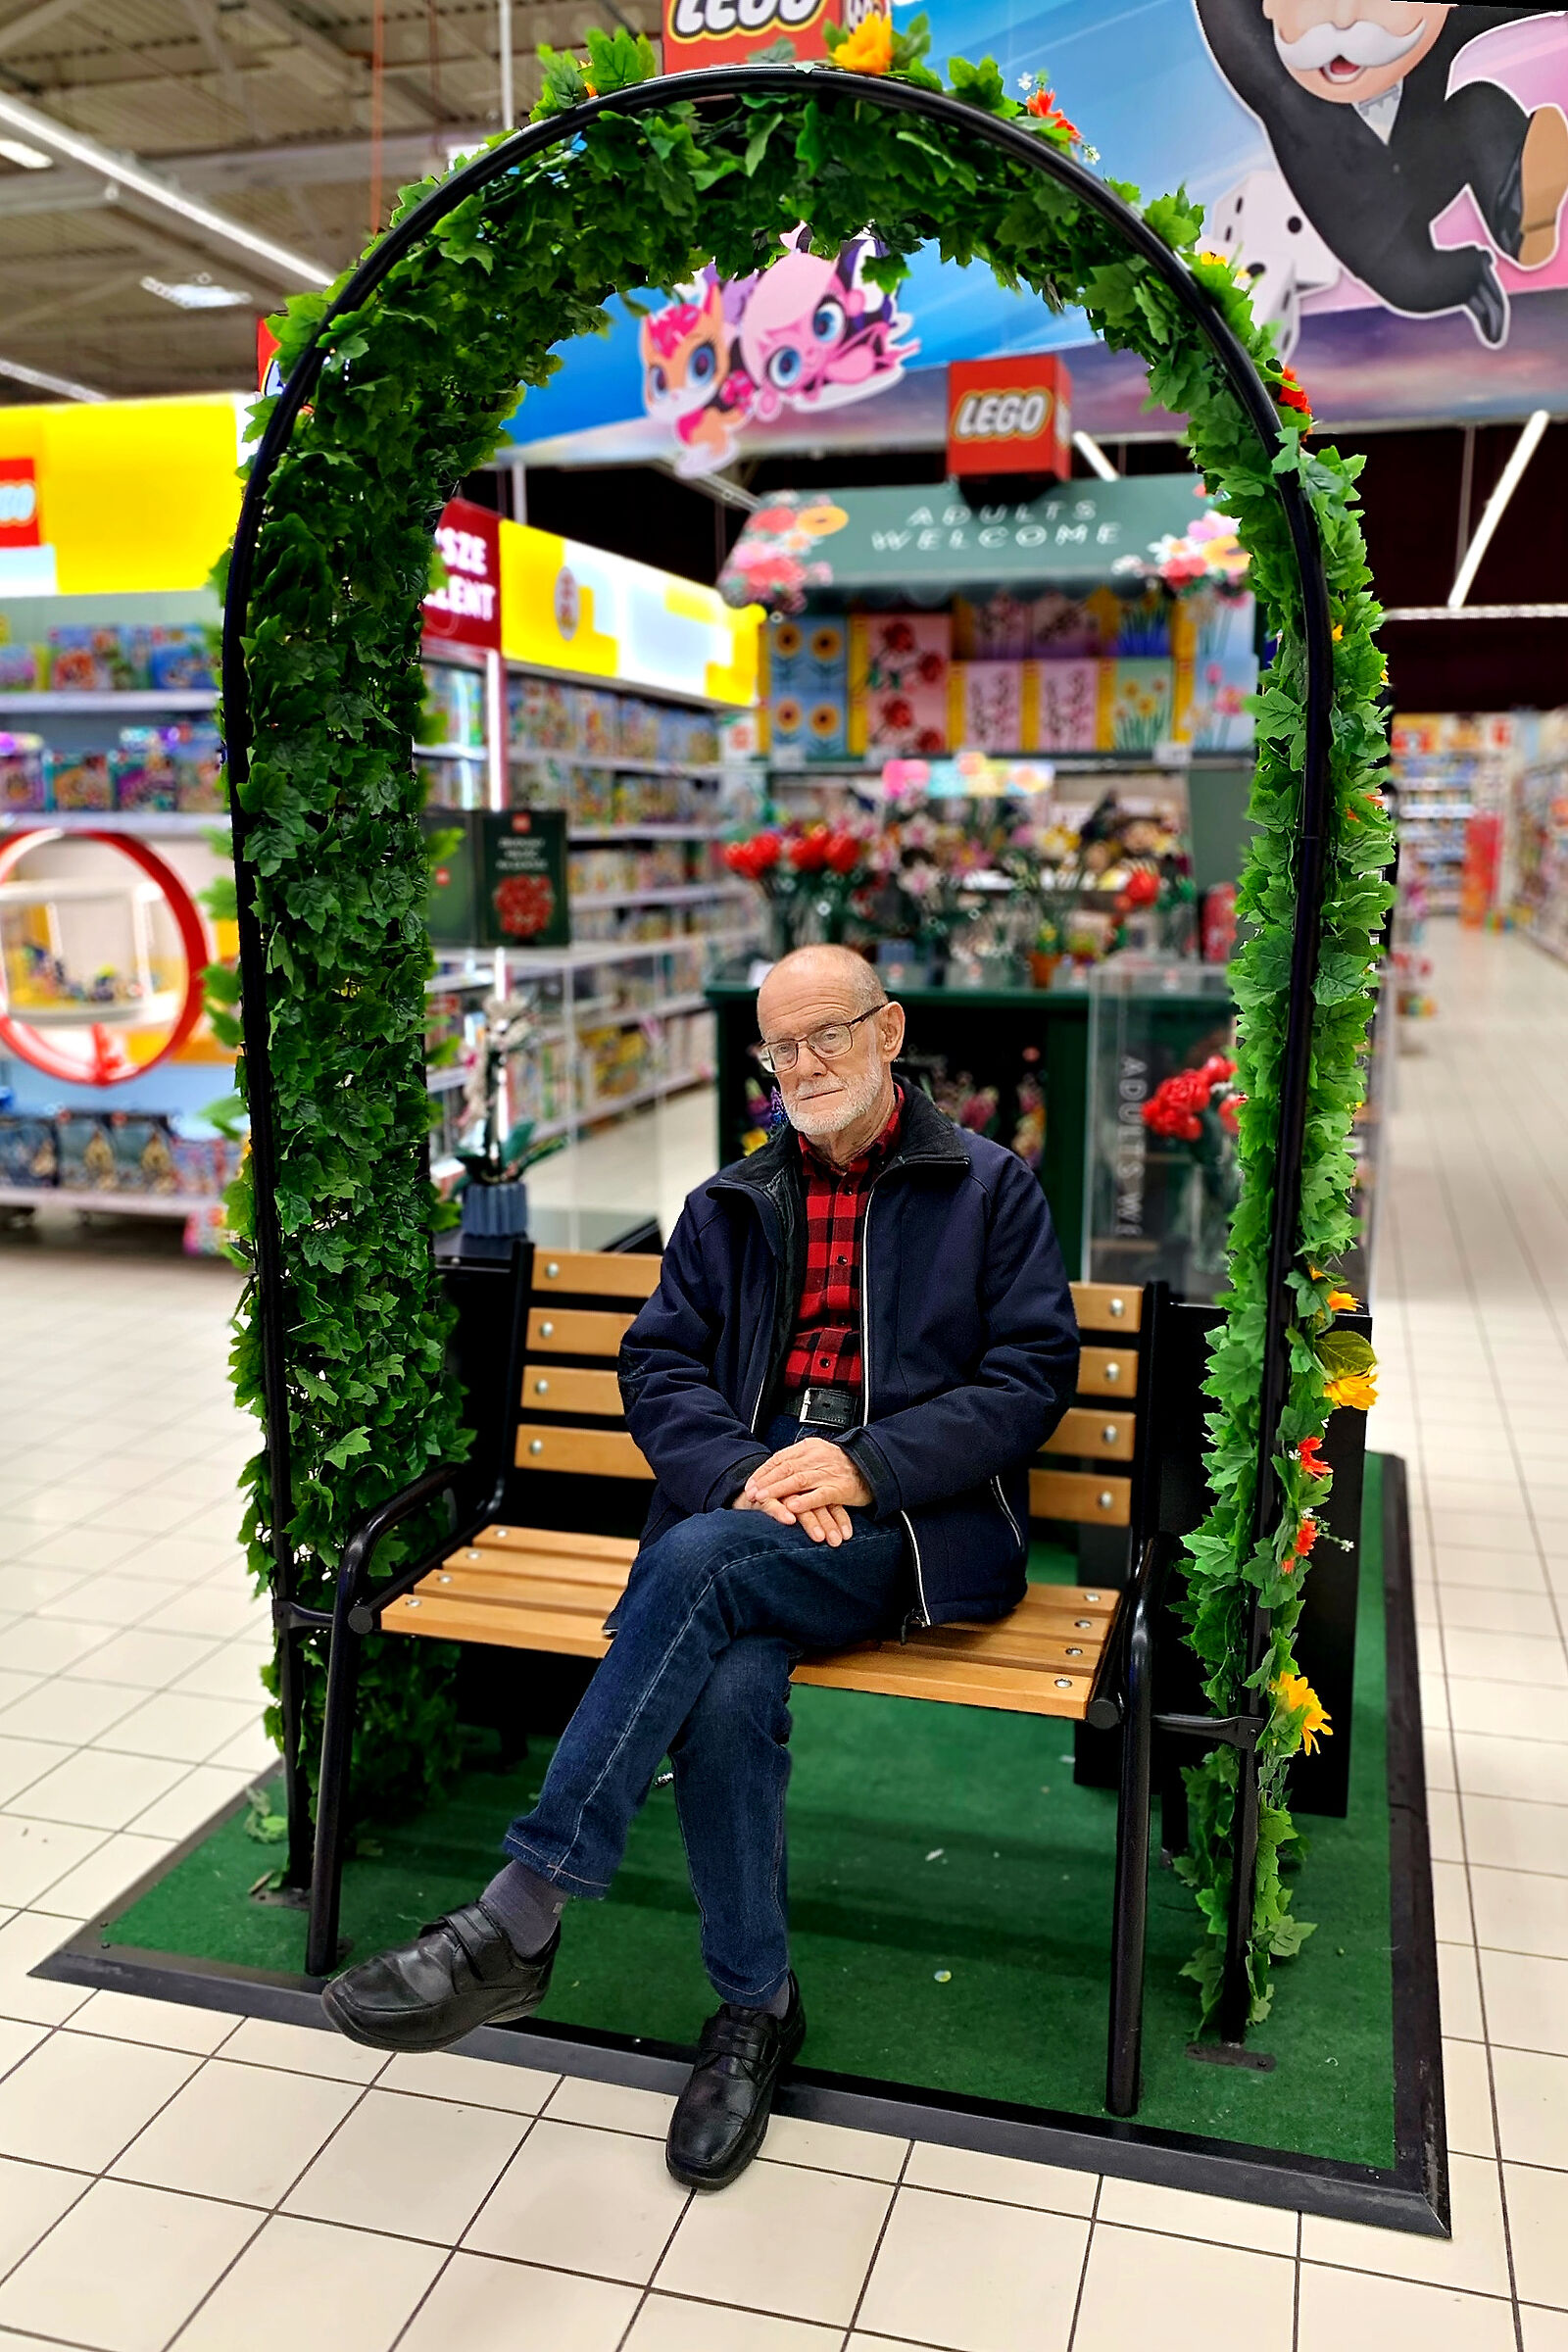 Relaxing while shopping? Or maybe a moment of memories...